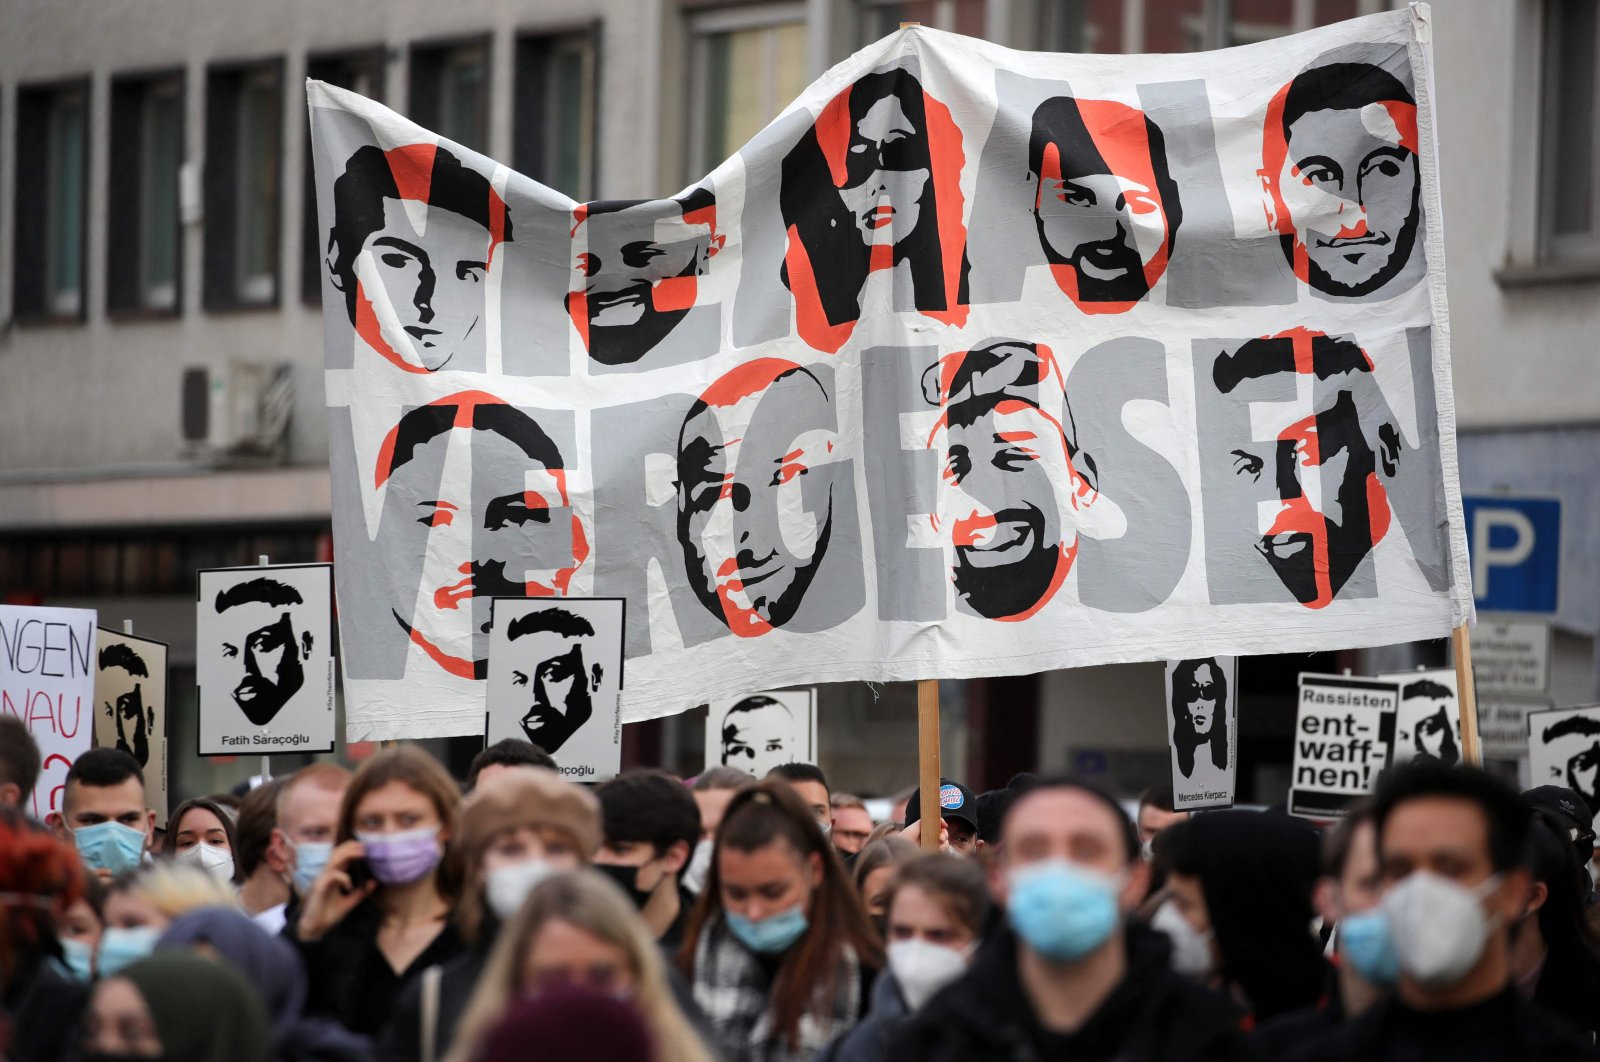 Demonstrators hold up a banner with images of the nine victims of Hanau attacks, in Hanau, Germany, Feb. 19, 2021. (AFP Photo)